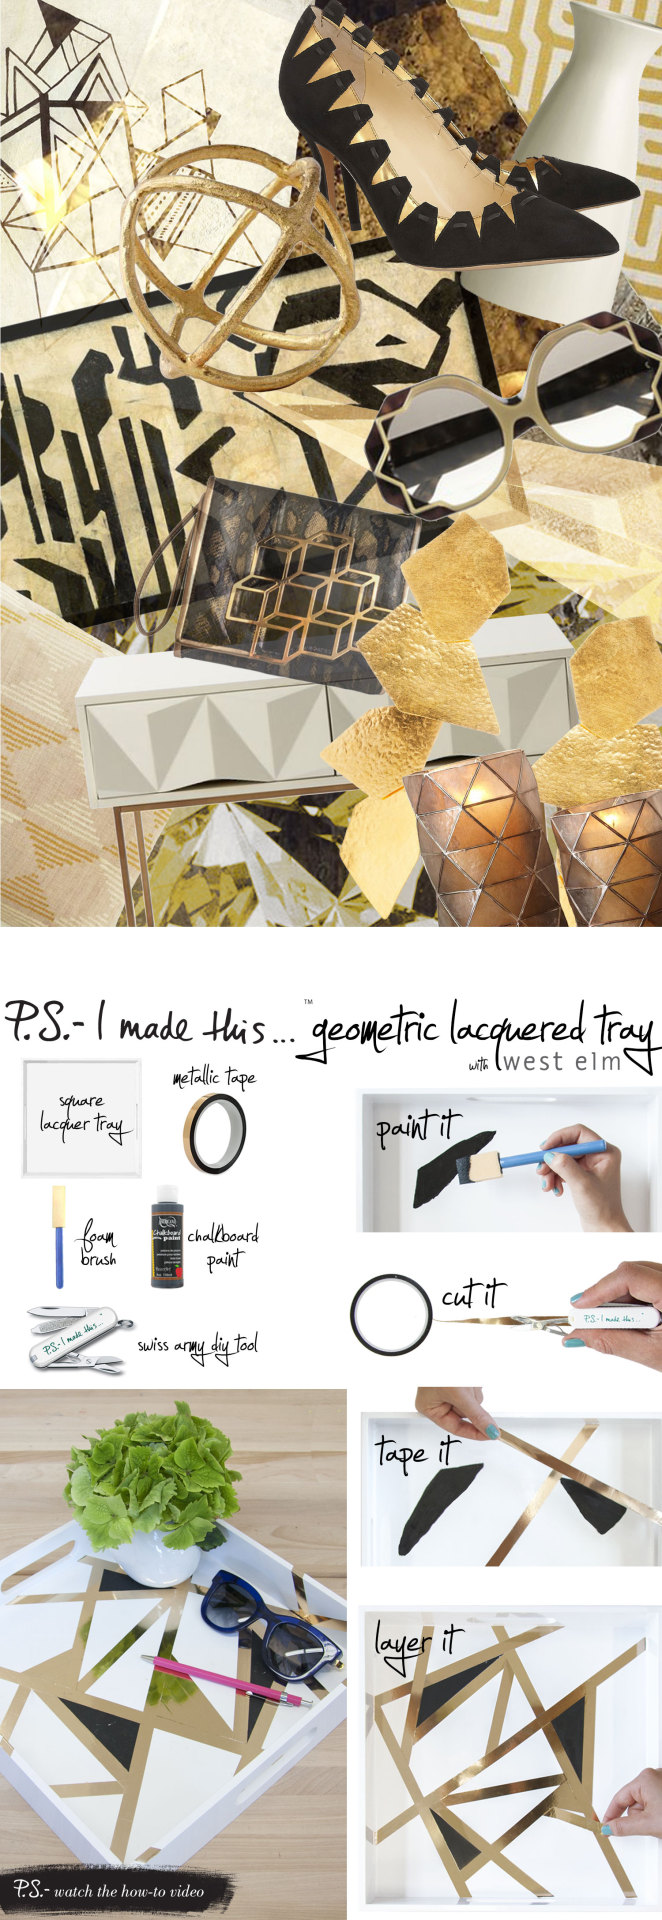 40+ Painted Trays to Decorate Your Home - Mod Podge Rocks